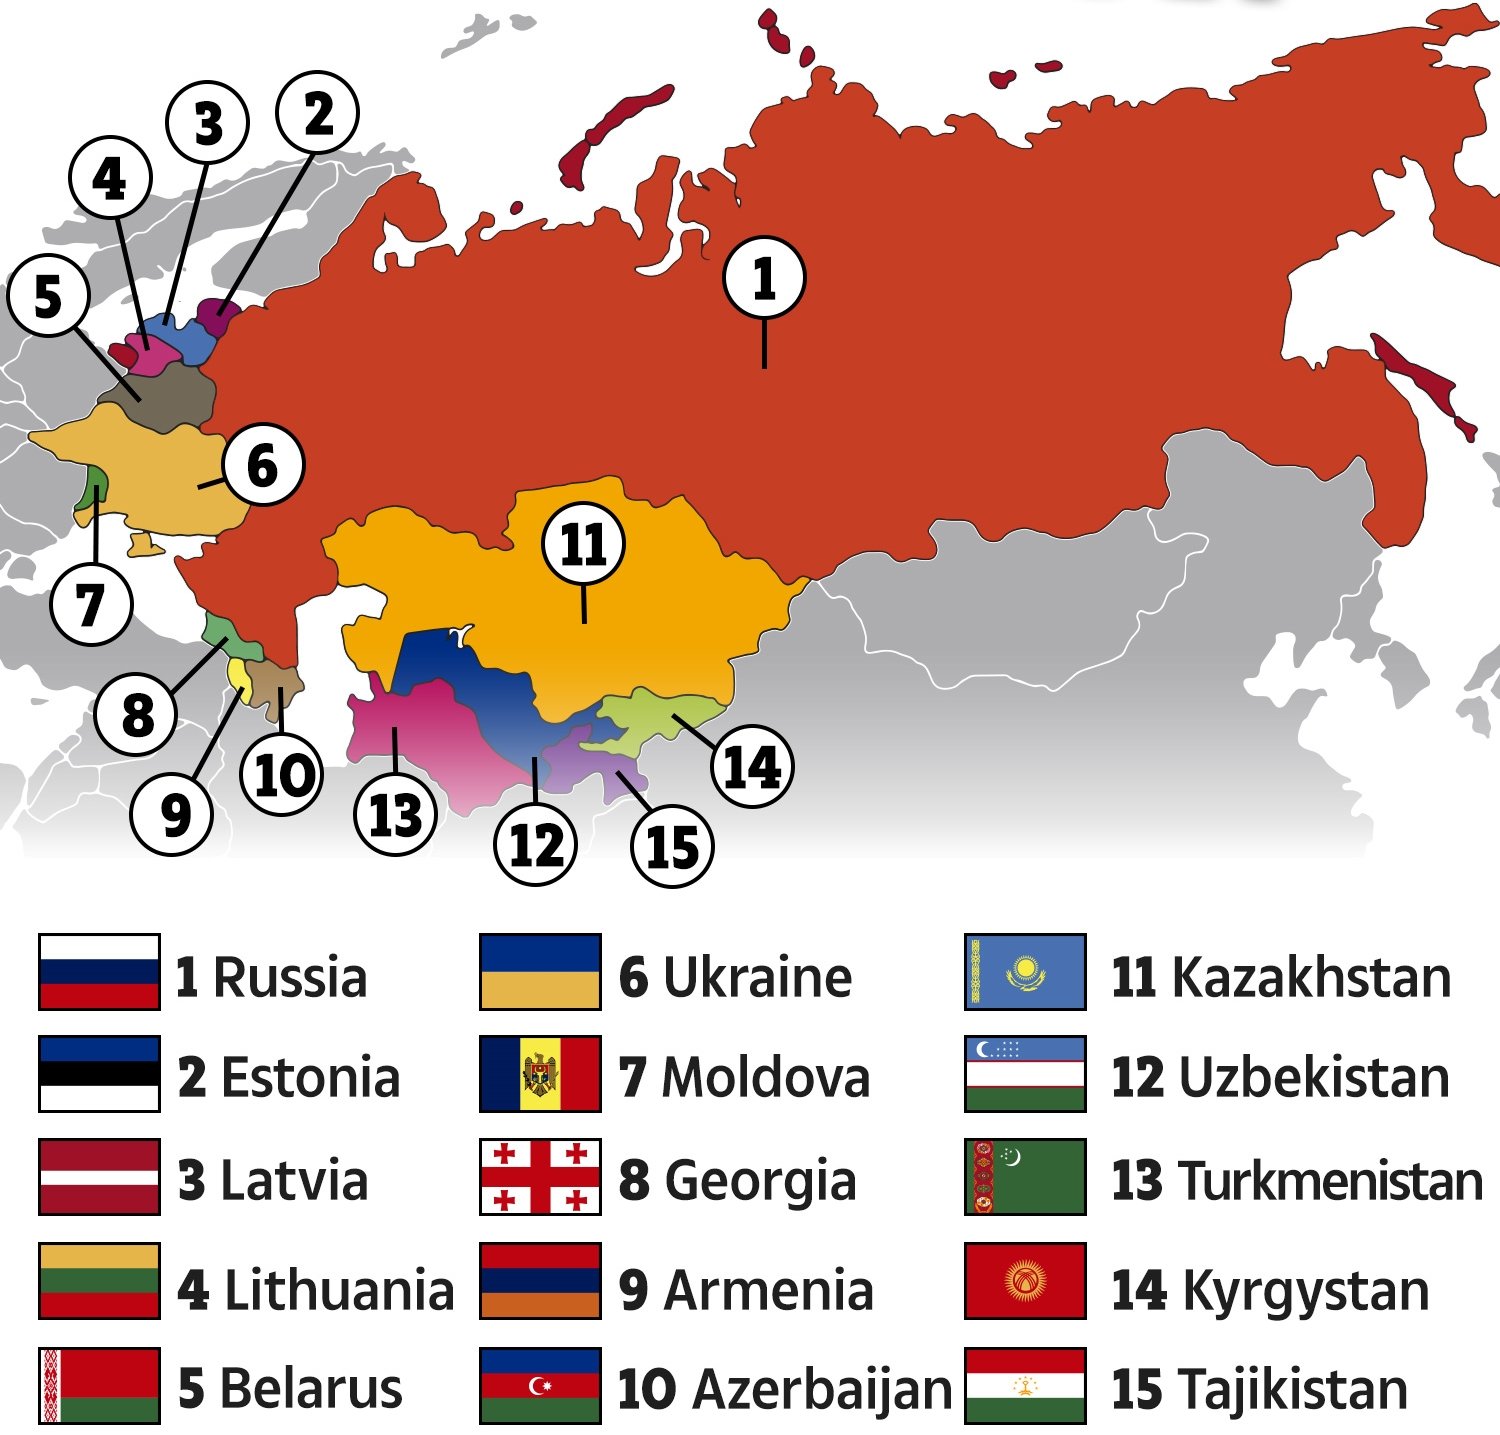 Countries which were part of erstwhile USSR